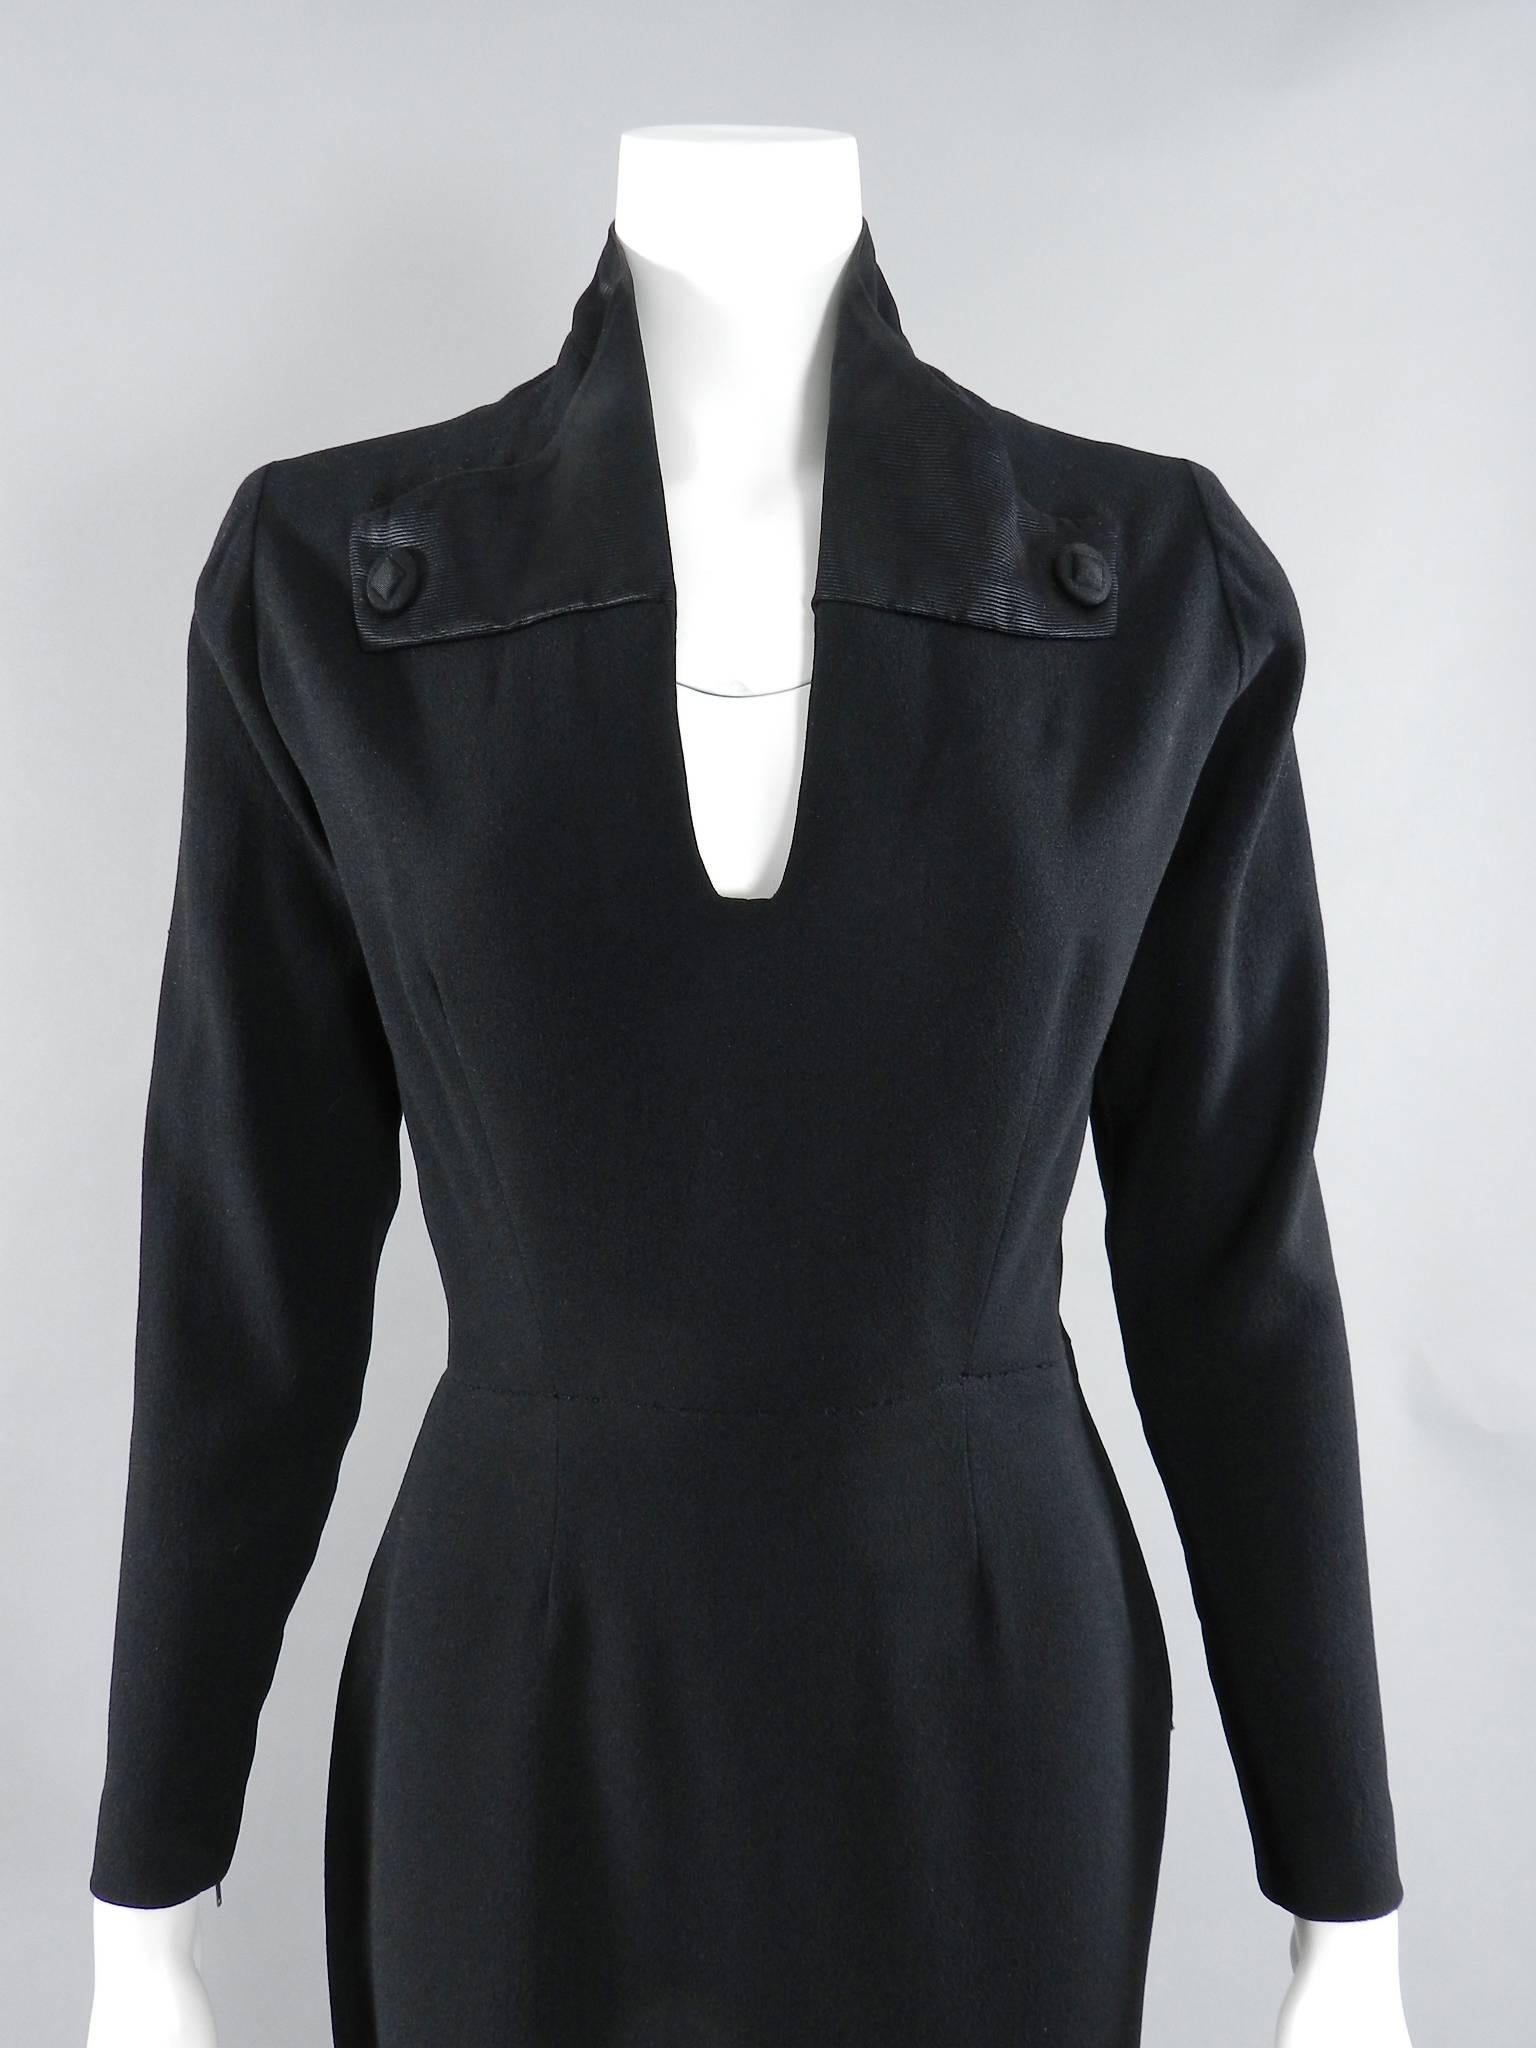 Vintage Pierre Balmain haute couture dress circa early 1950's. Black unlined wool trimmed with finely ribbed silk satin. Metal side zipper and at cuffs. 25